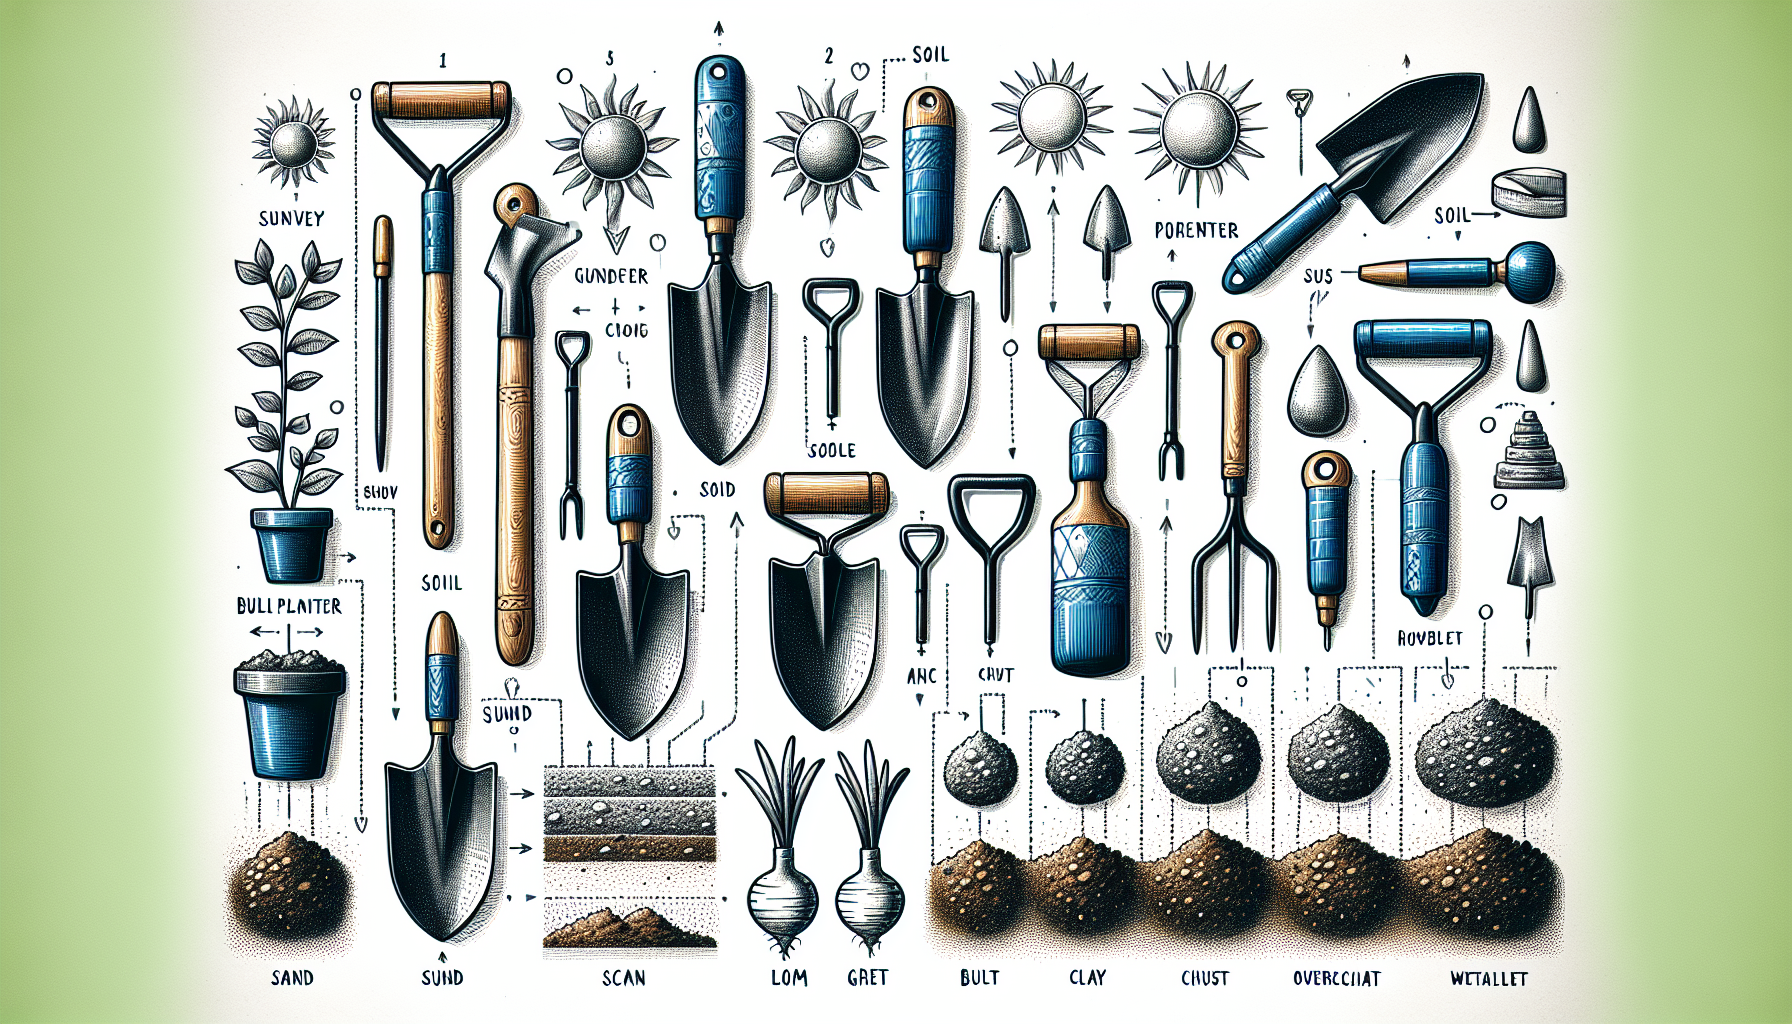 What Is The Best Tool For Planting?